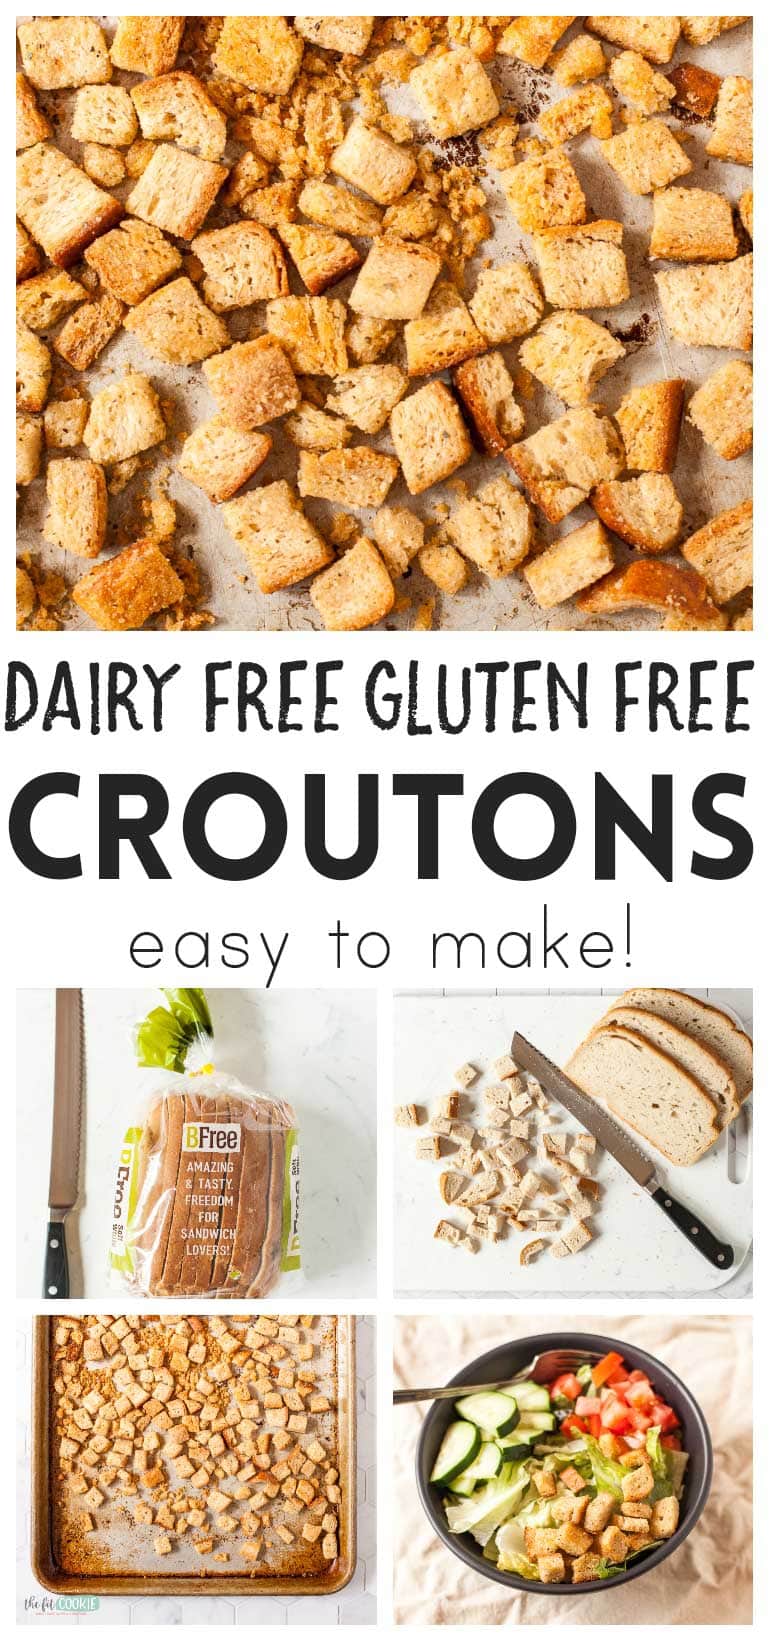 photo collage of gluten free croutons with text overlay